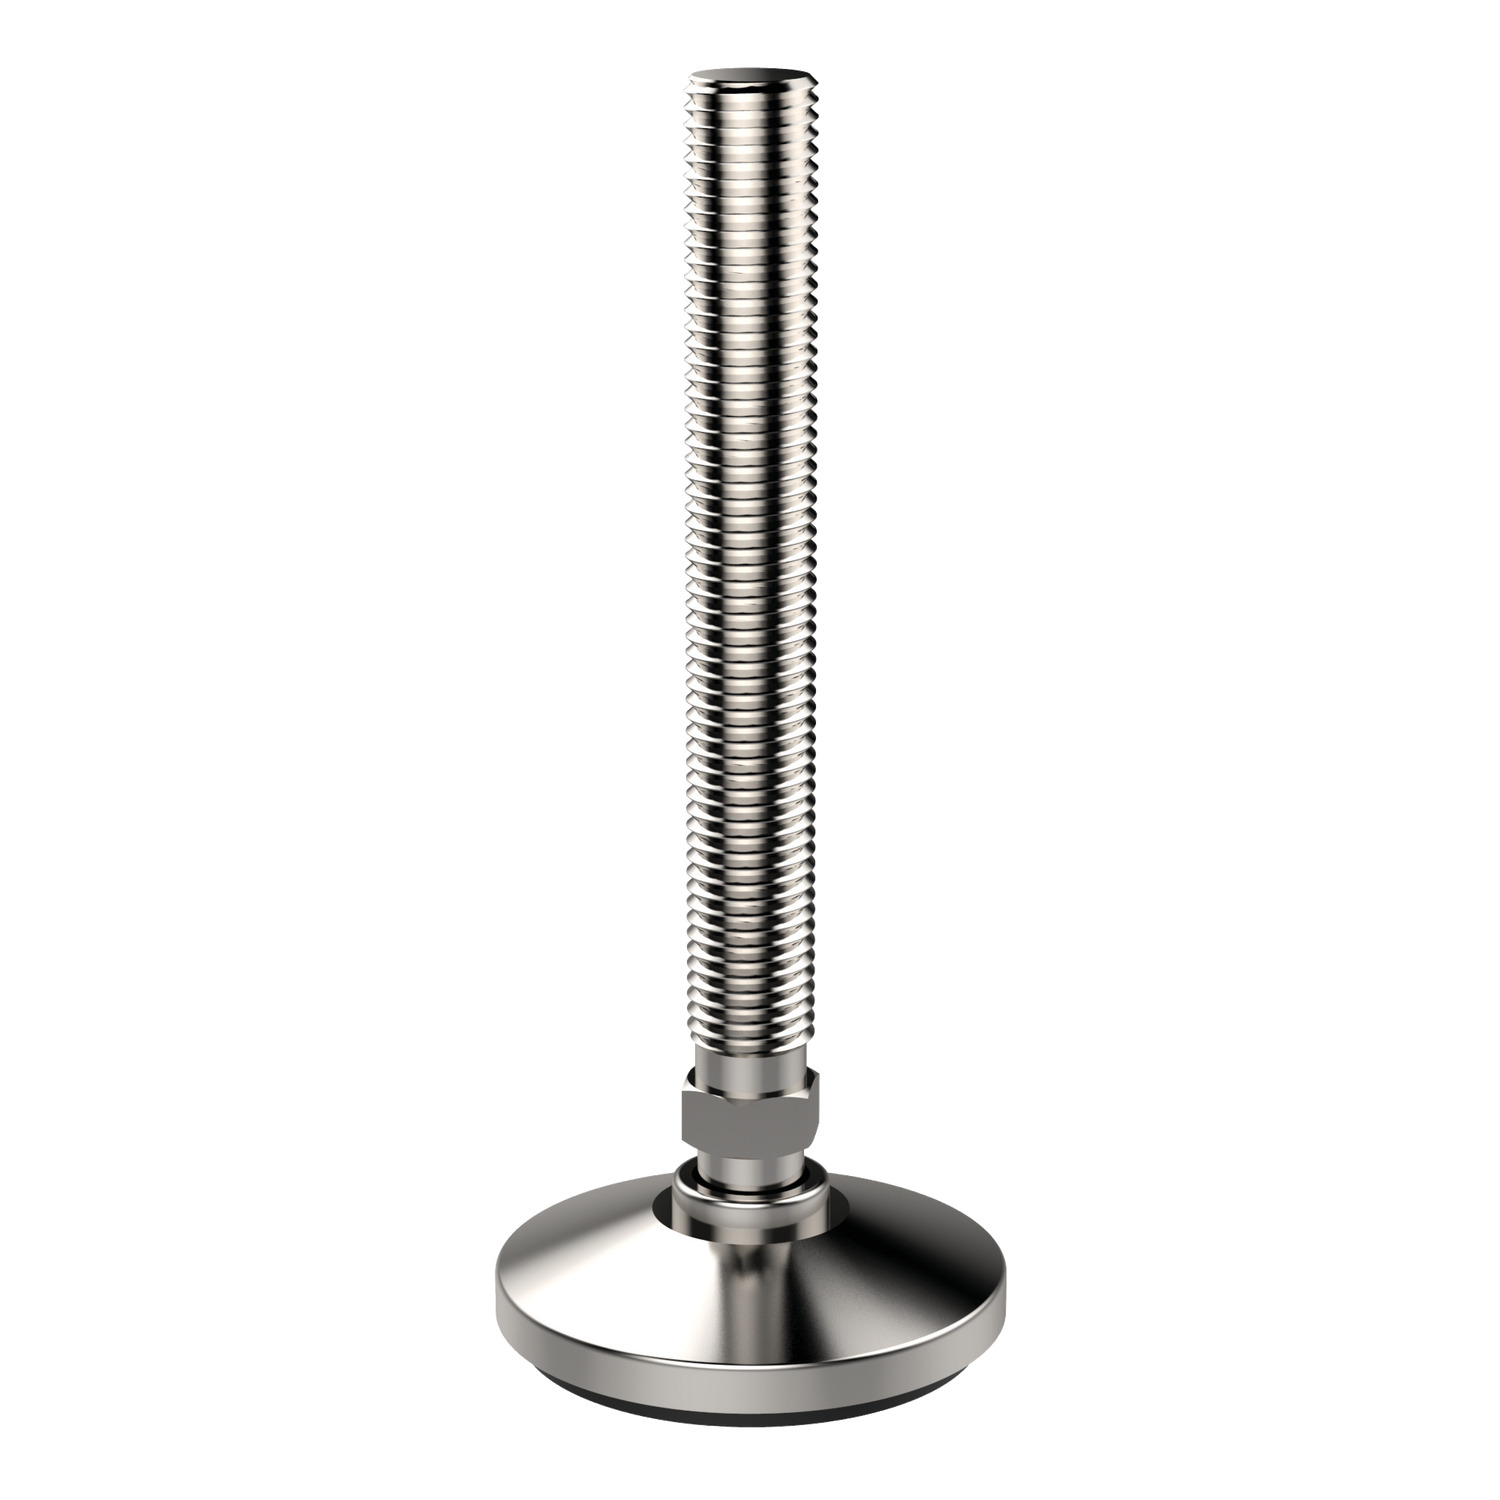 34711.W0120 Levelling Feet Pad & bolt stainless steel - M12 - 75. Also known as W4100.AC0120